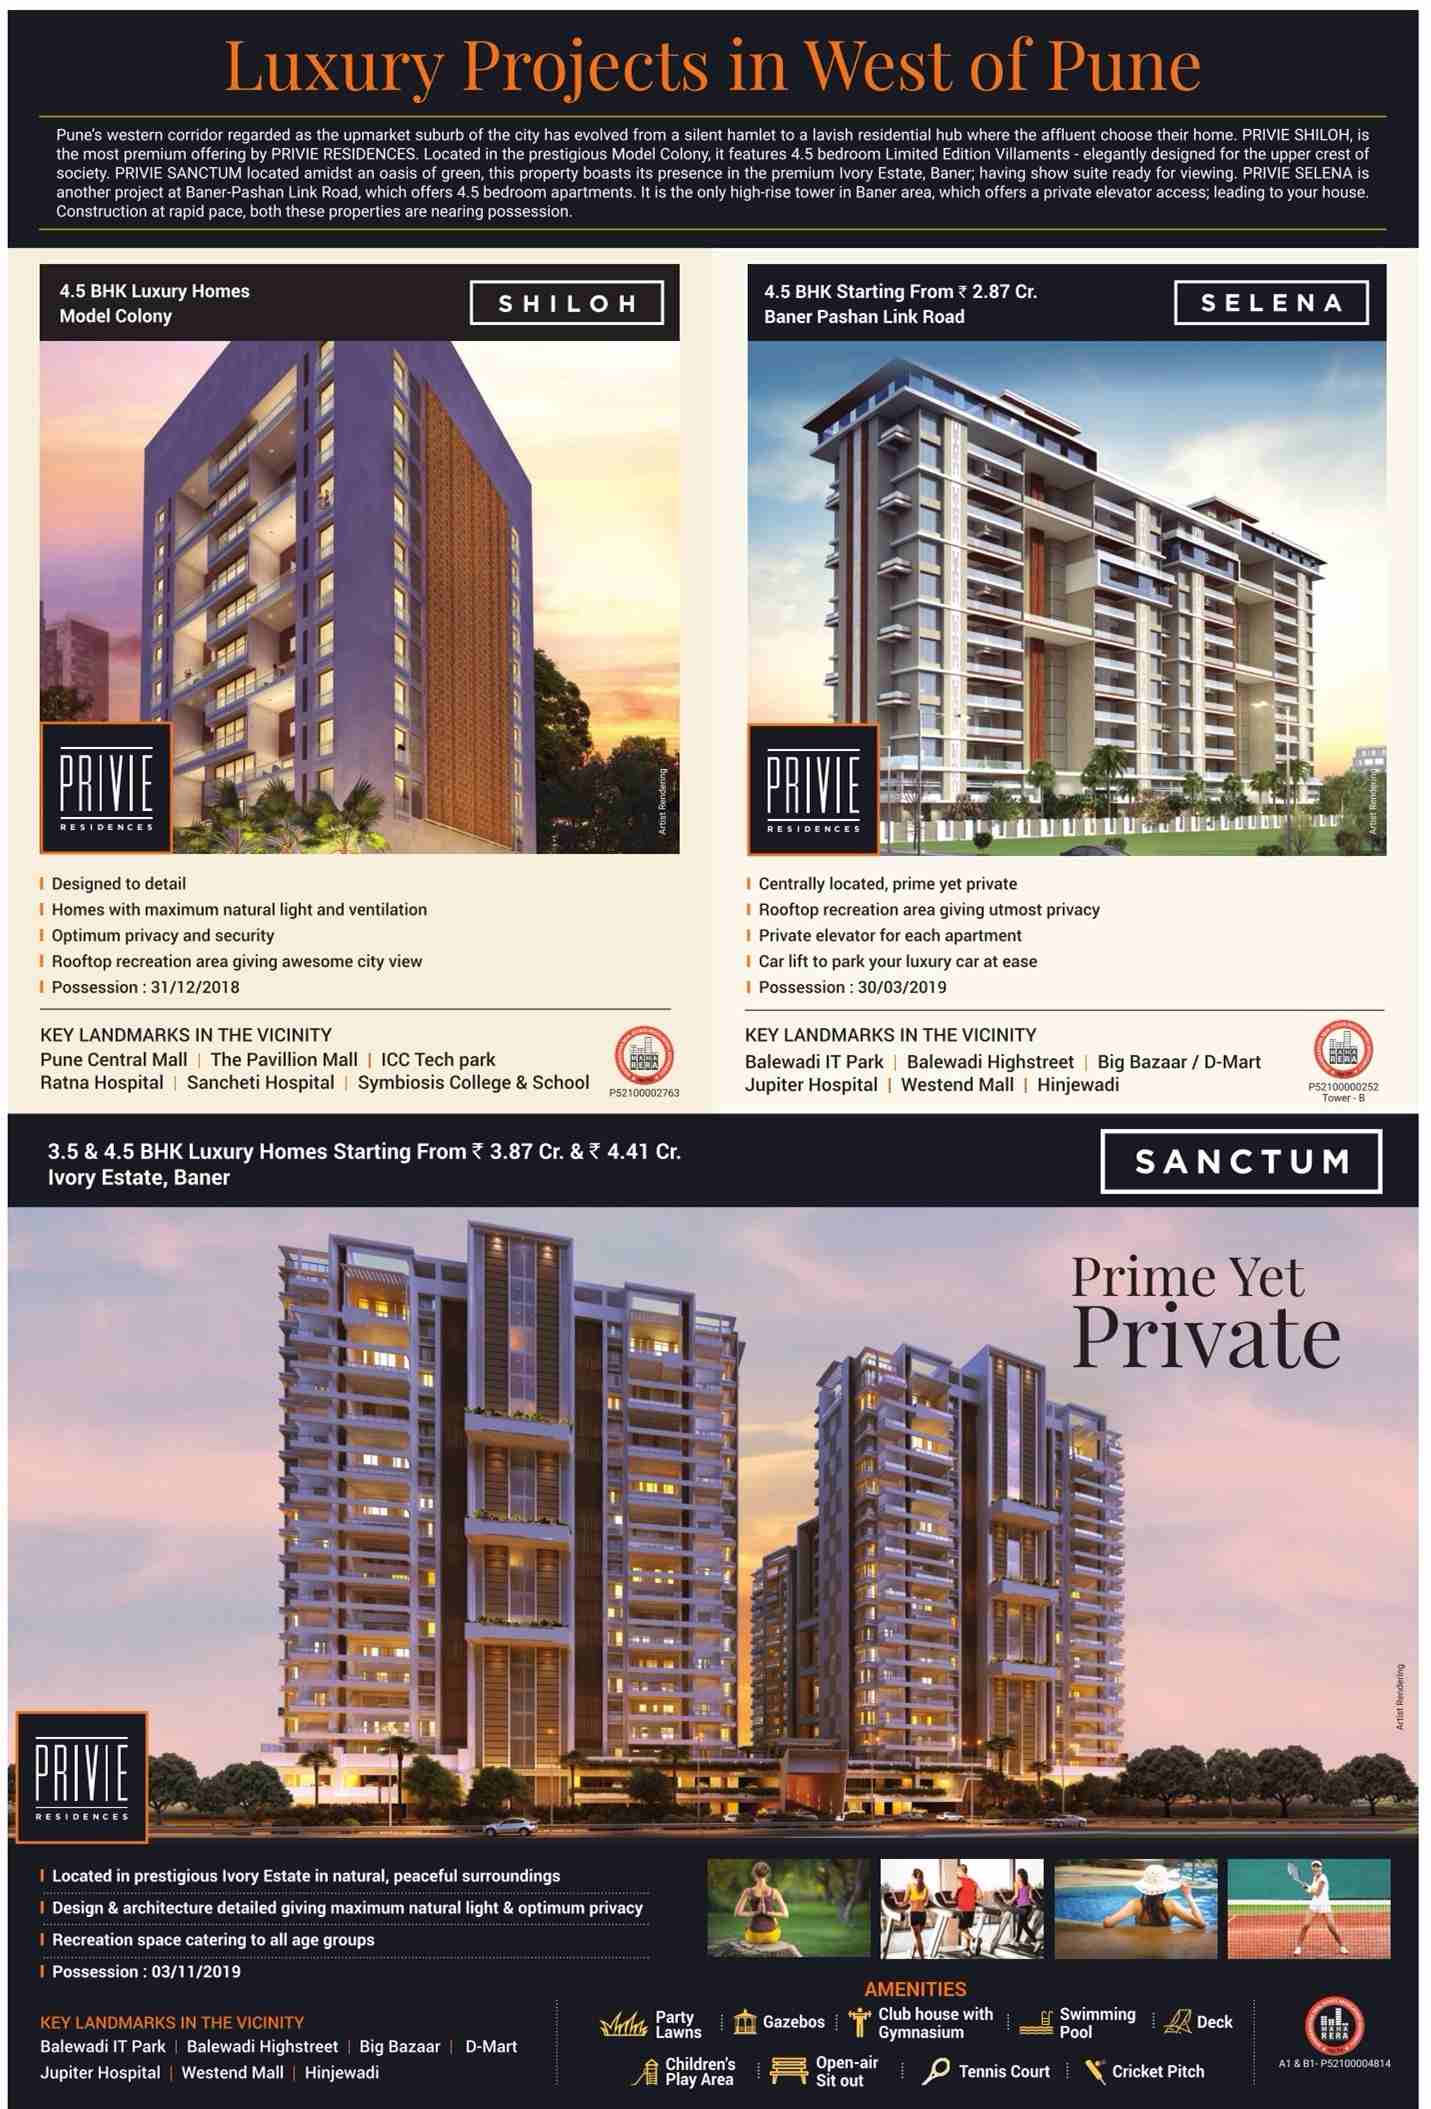 Reside in luxury projects of Privie Residences in Pune